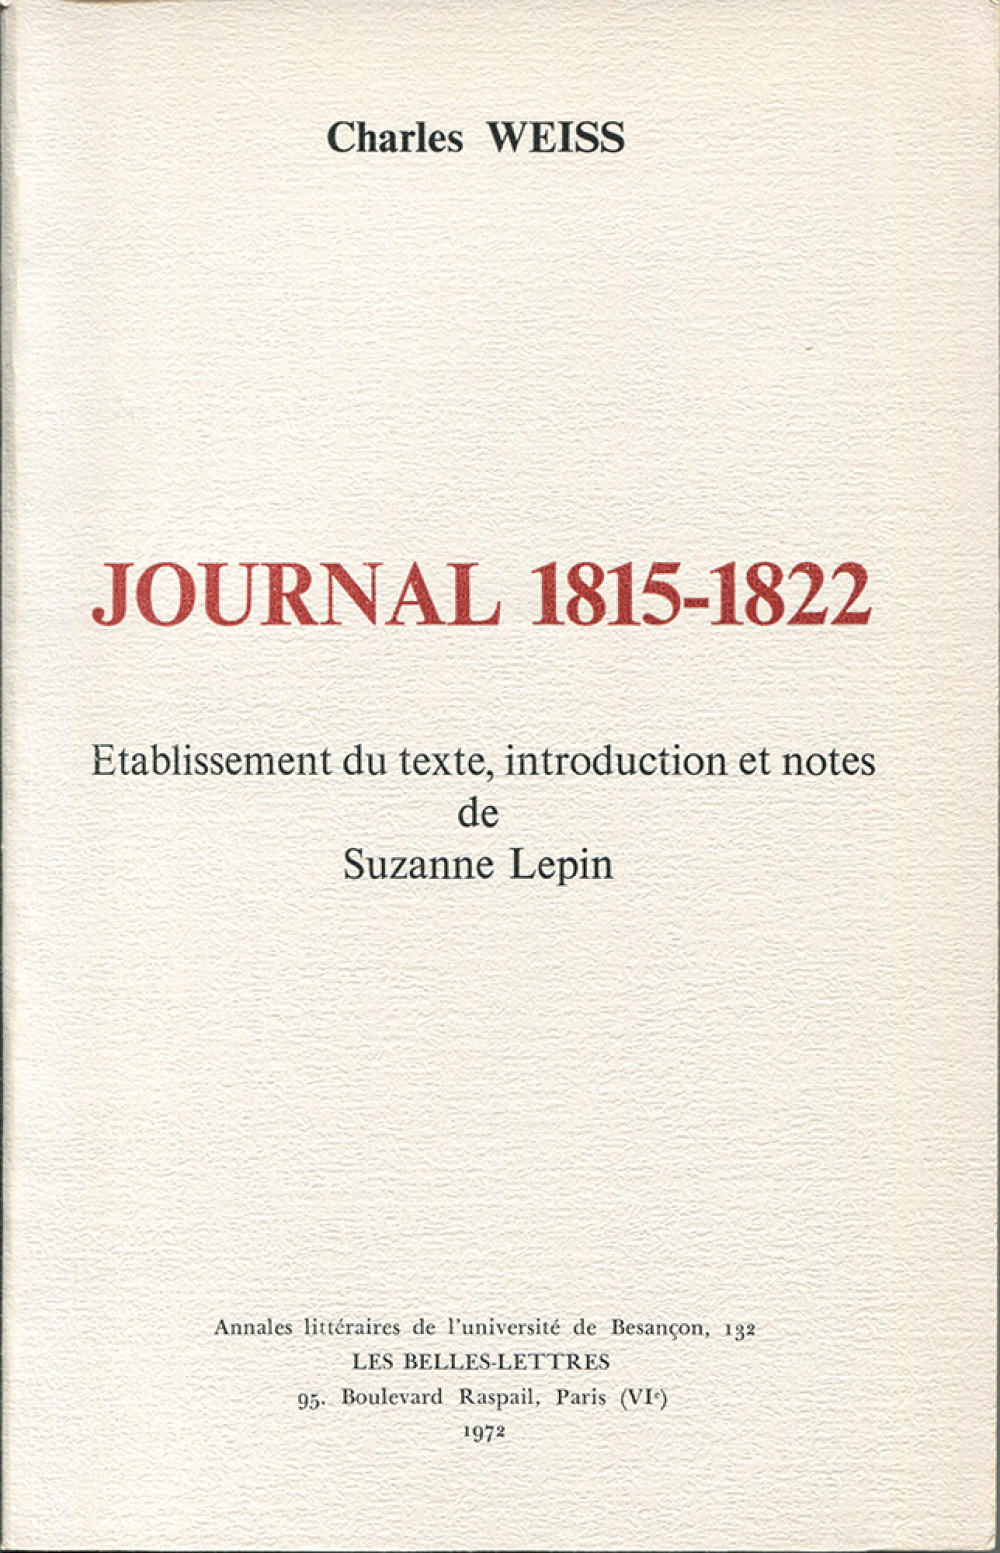 Charles Weiss. Journal 1815-1822 